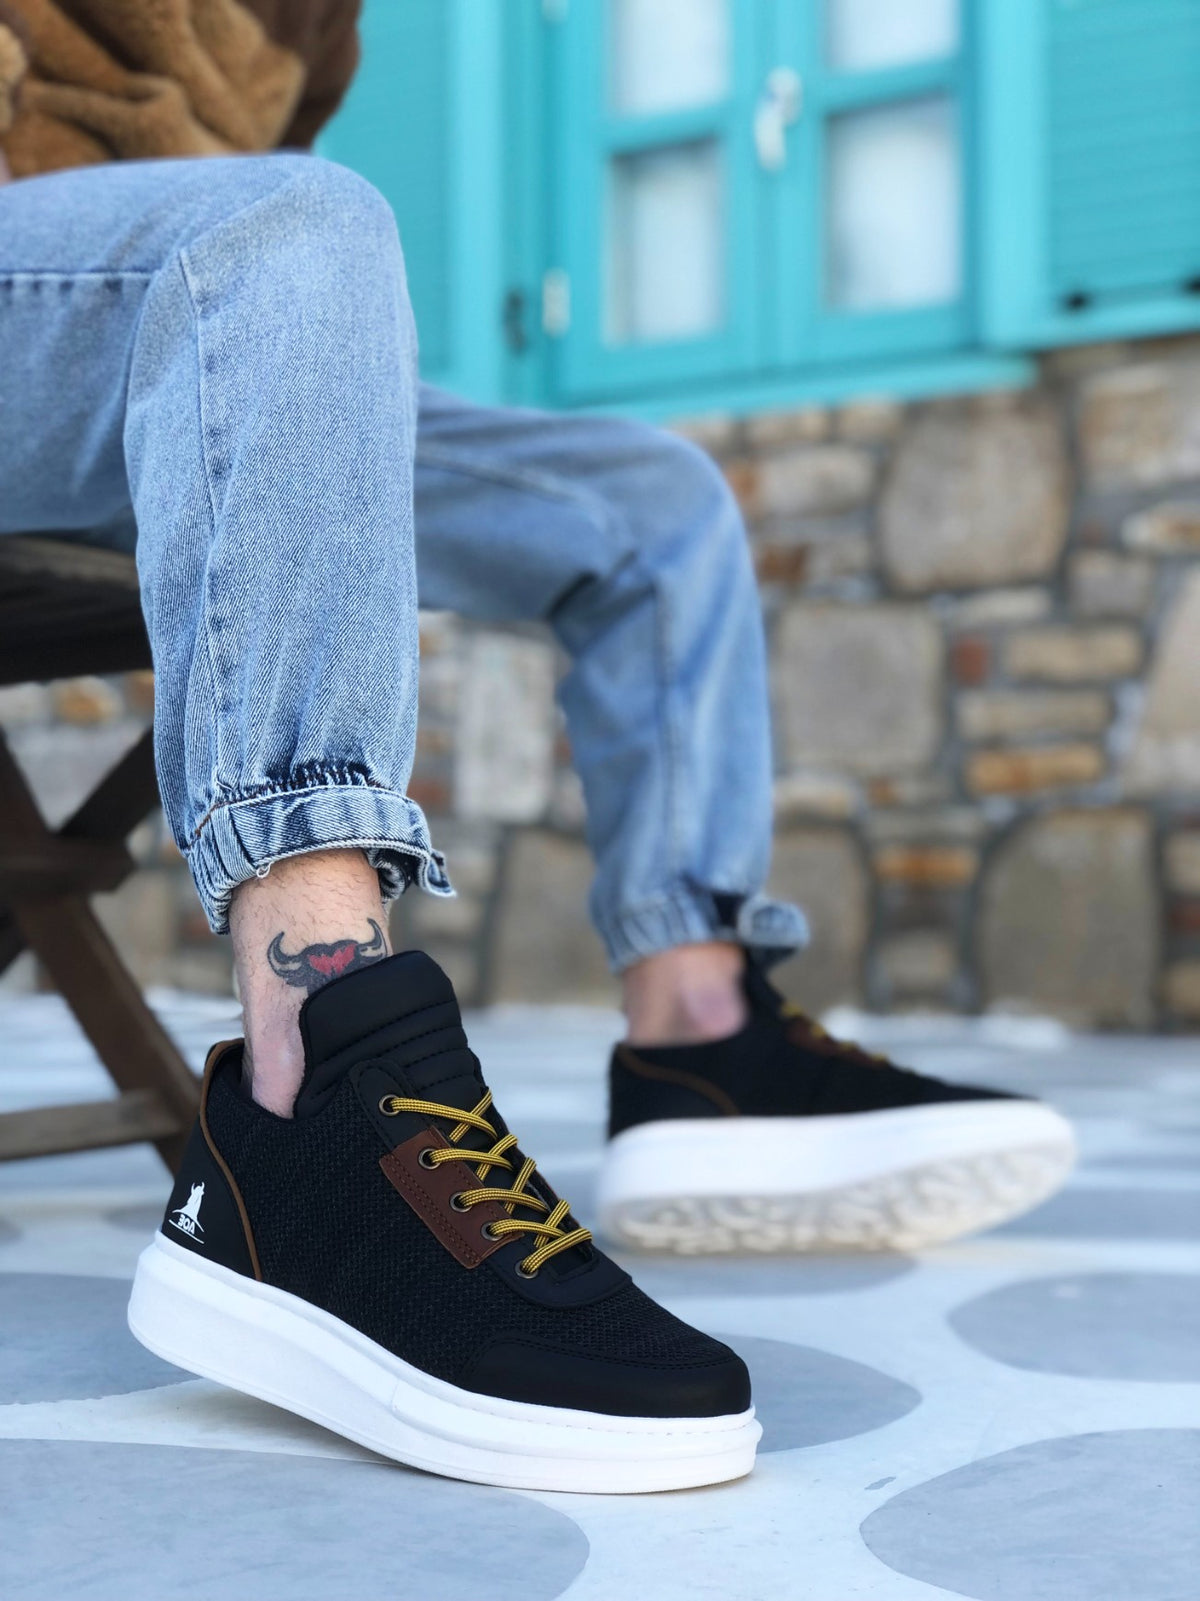 BA0606 Lace-up Comfortable High Sole Black Patterned Casual Men's Sneakers - STREETMODE™